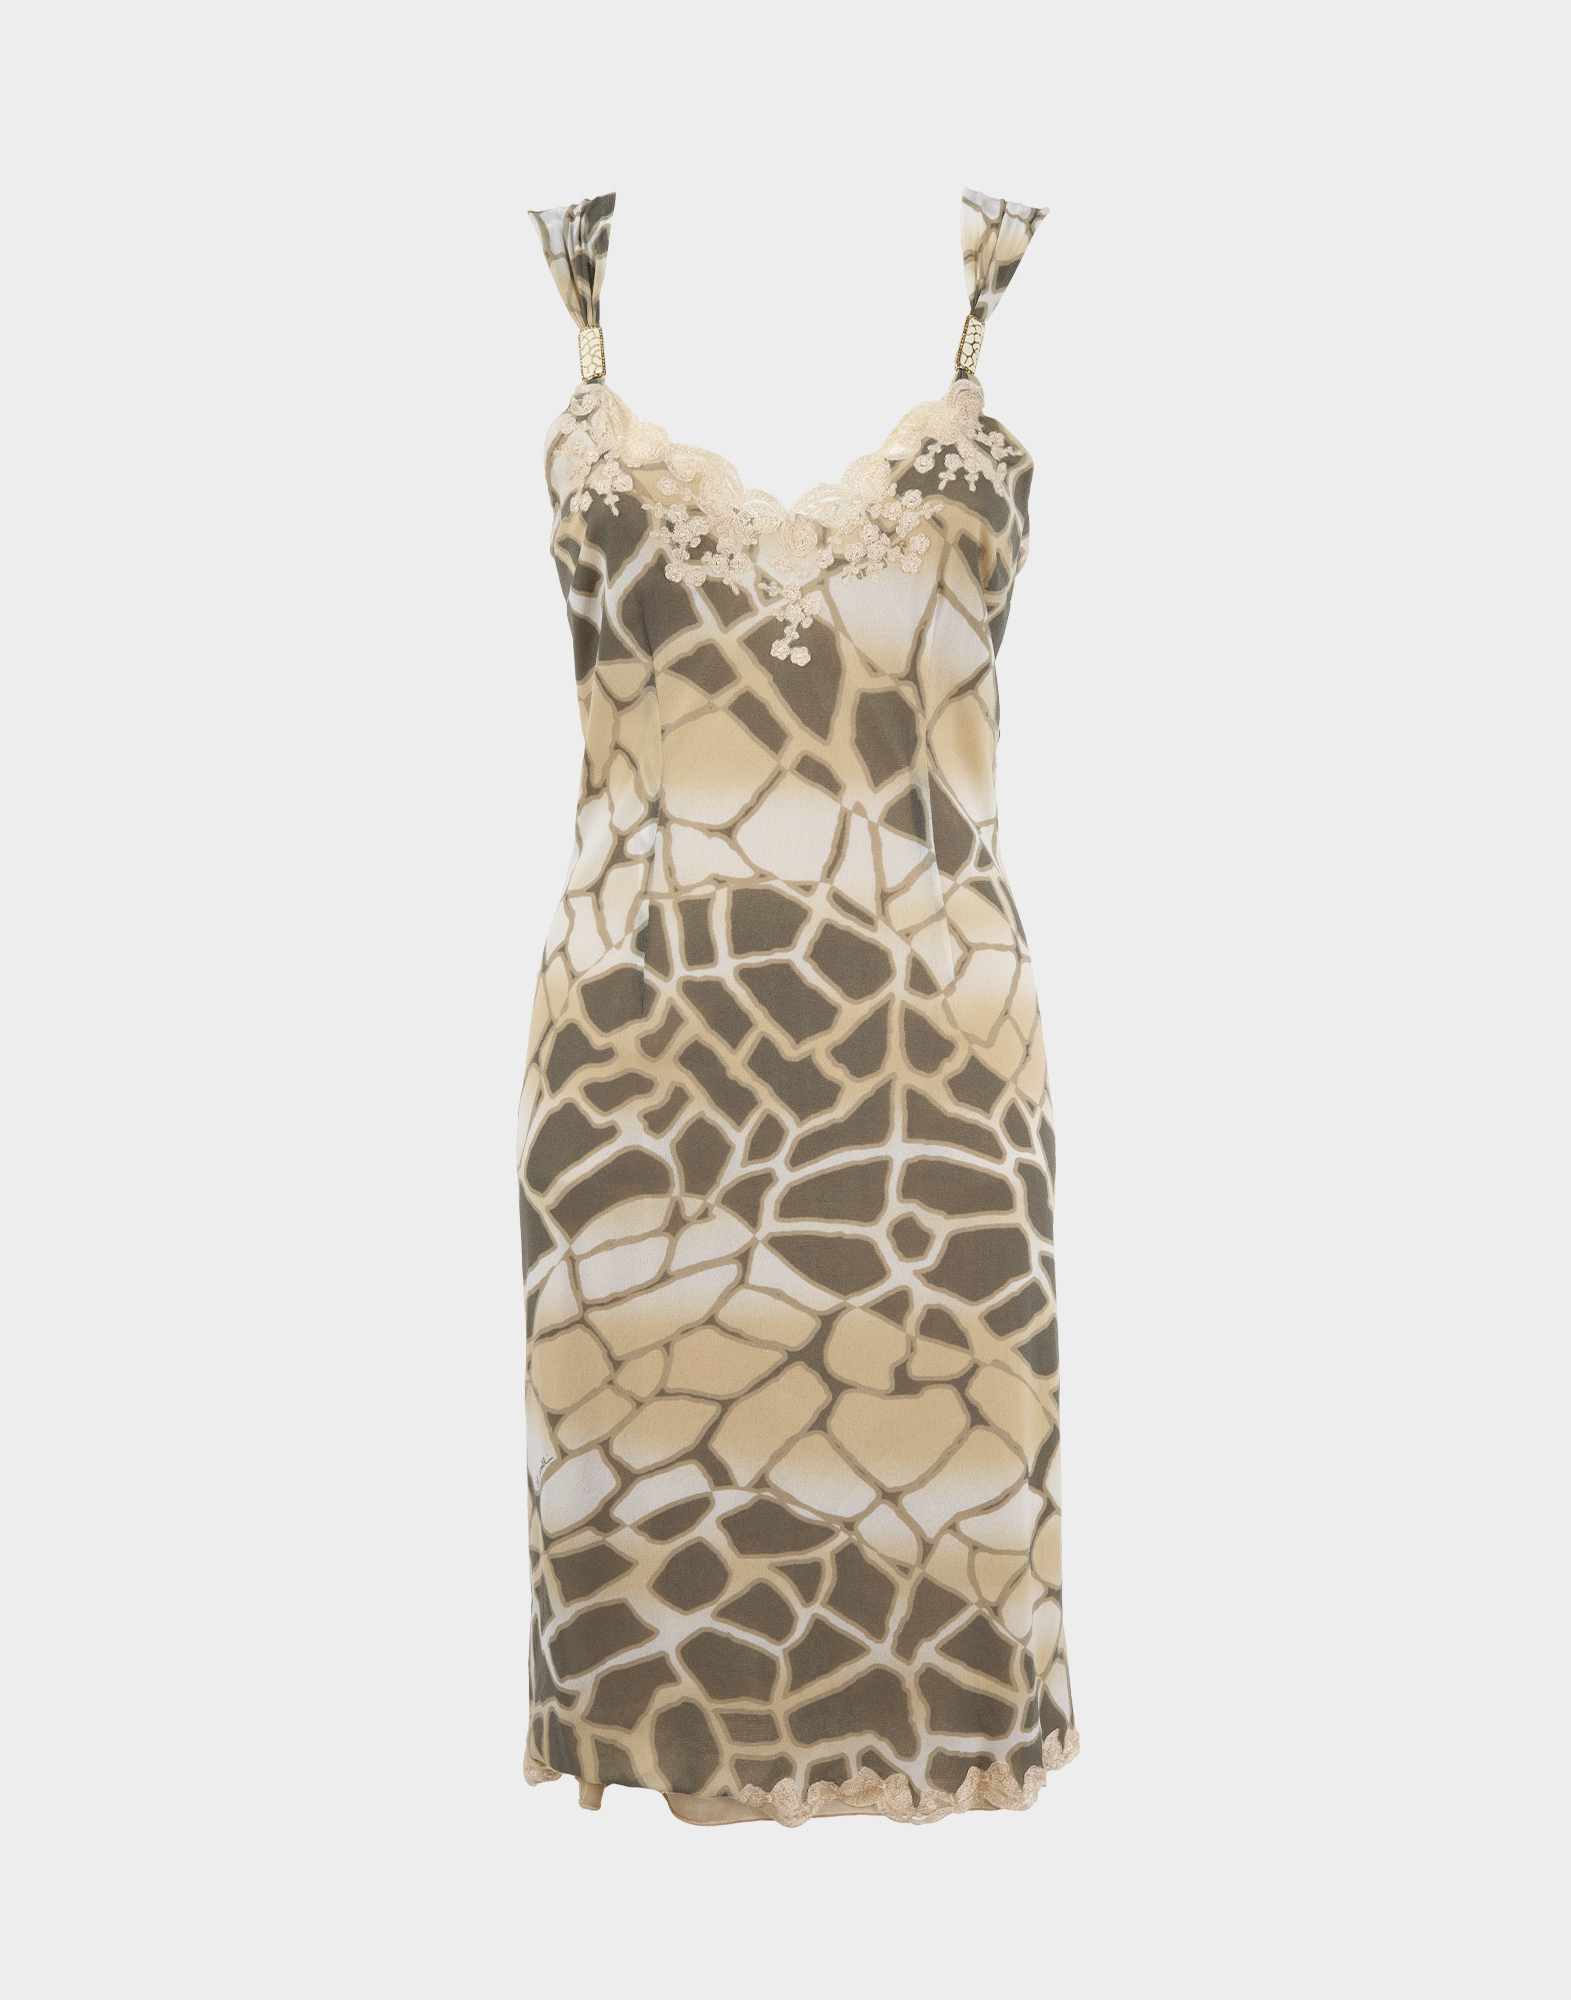 light women's dress with beige and brown animal pattern, straps with metallic details, lace neckline